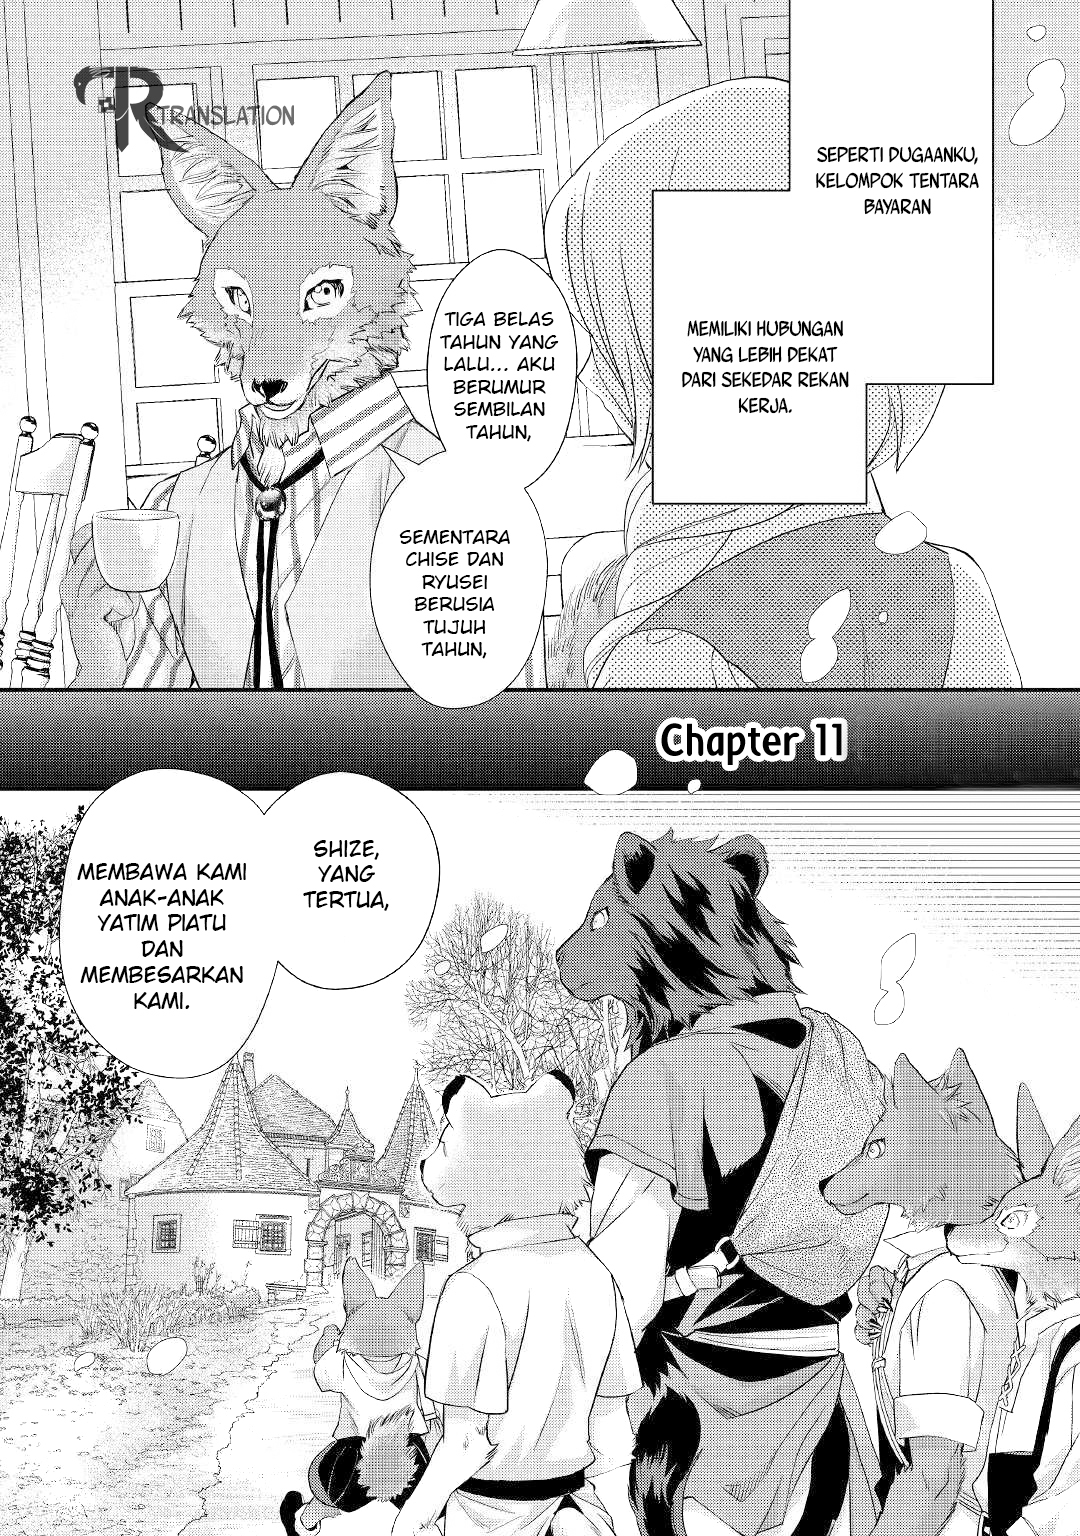 Milady Just Wants to Relax Chapter 011.1